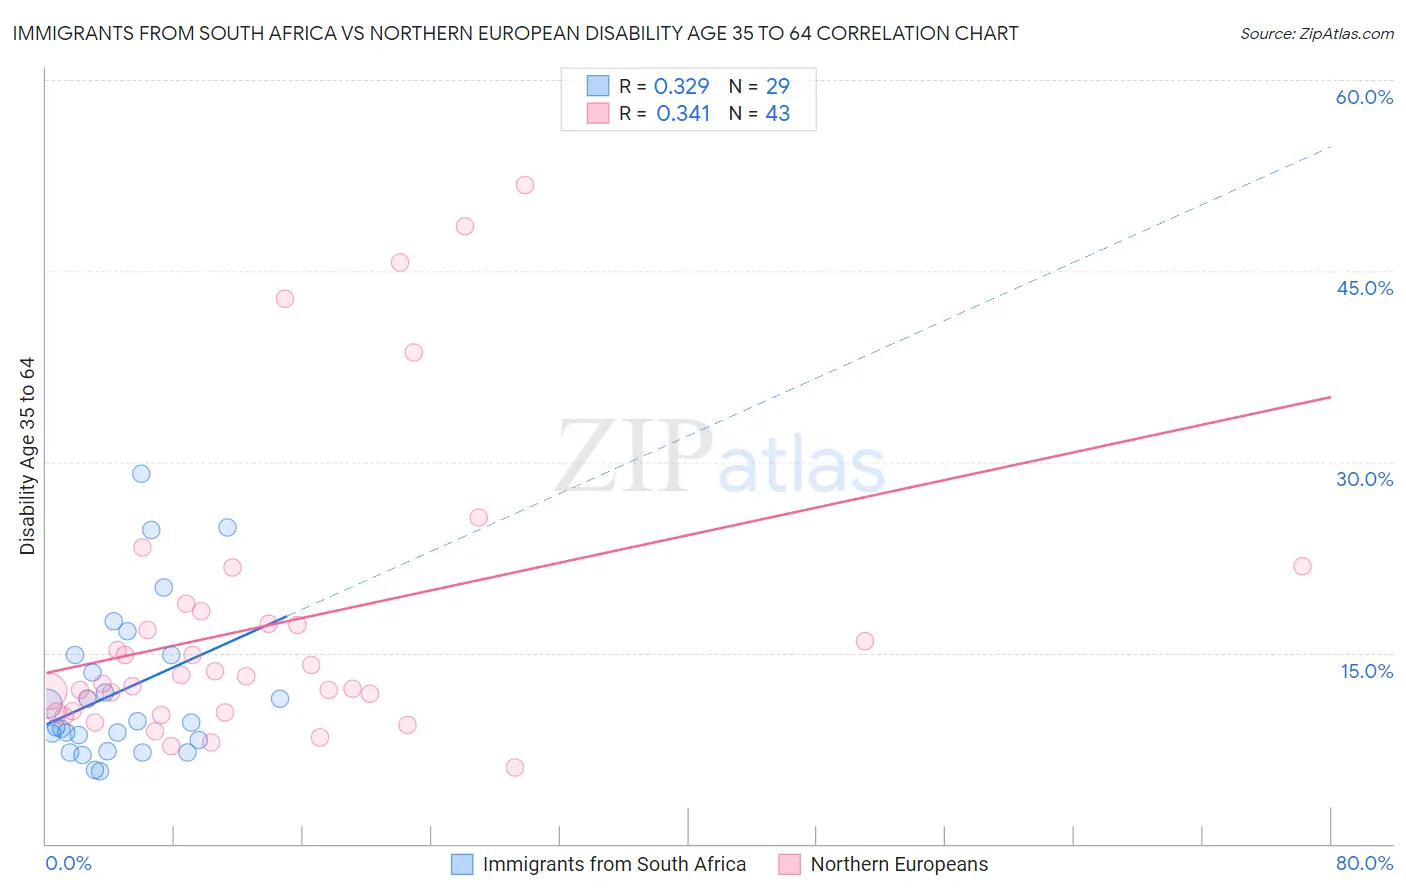 Immigrants from South Africa vs Northern European Disability Age 35 to 64